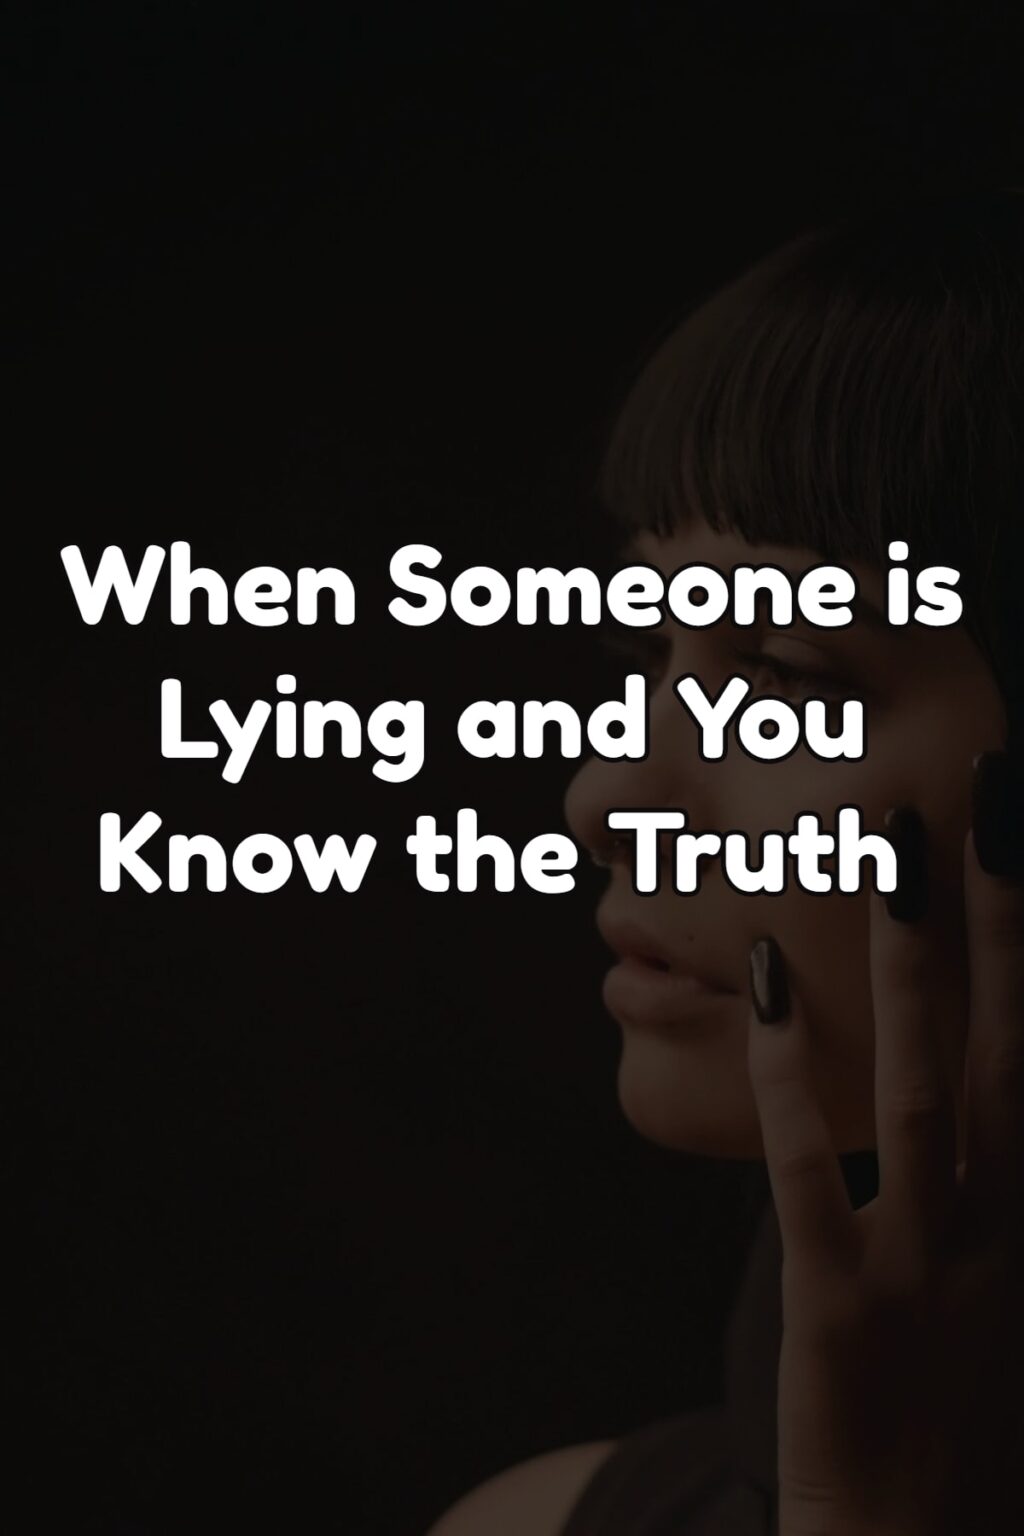 https://mindblood.com/wp-content/uploads/2020/11/When-Someone-is-Lying-and-You-Know-the-Truth-Quotes-1-2-1024x1536.jpg